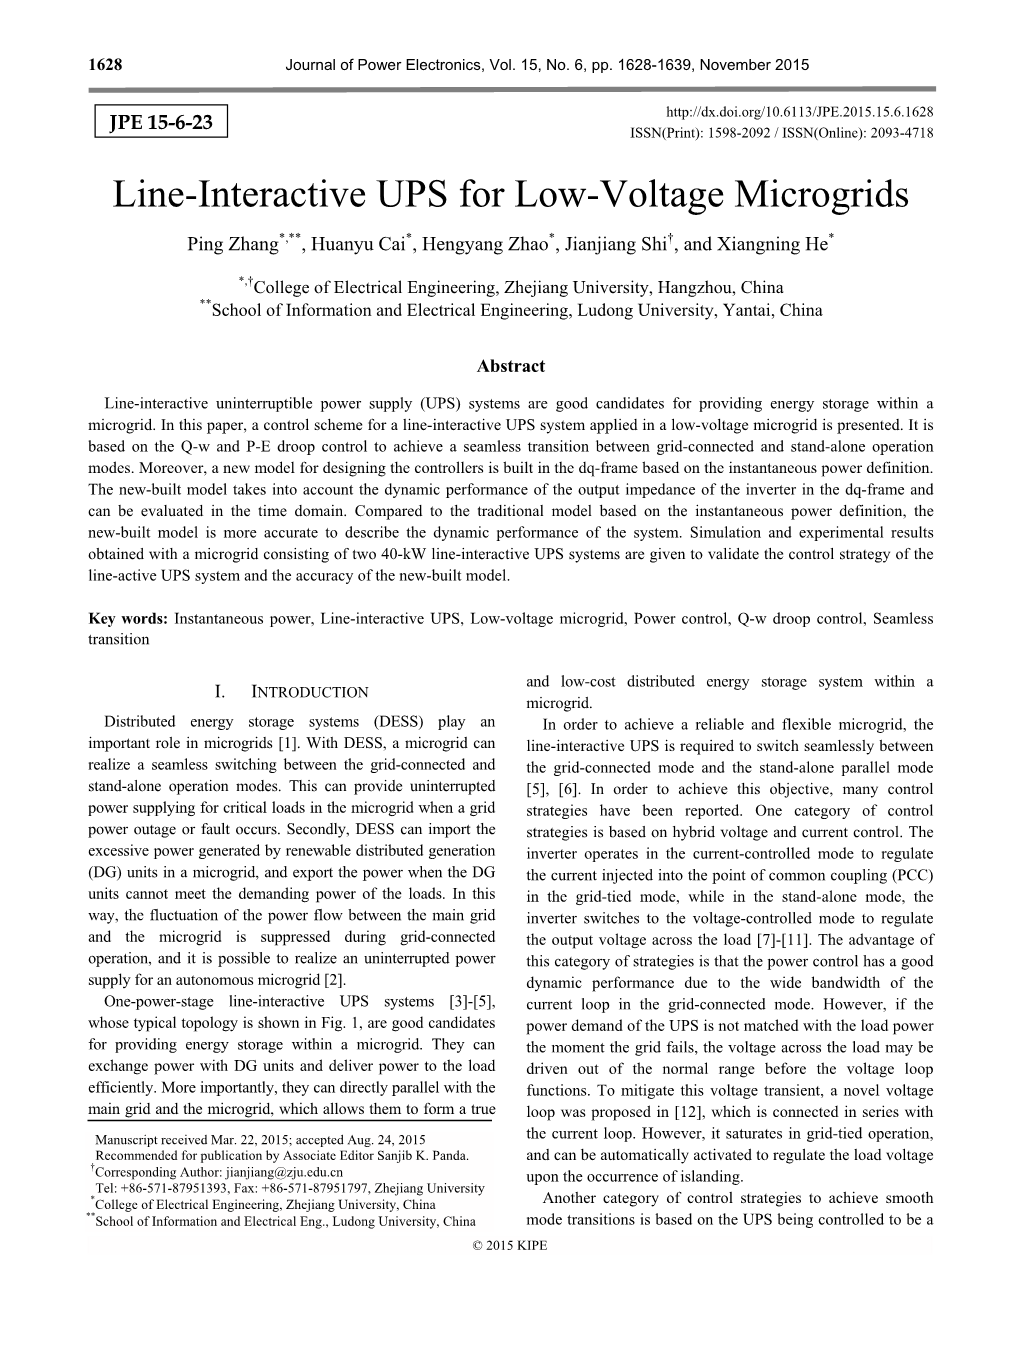 Line-Interactive UPS for Low-Voltage Microgrids